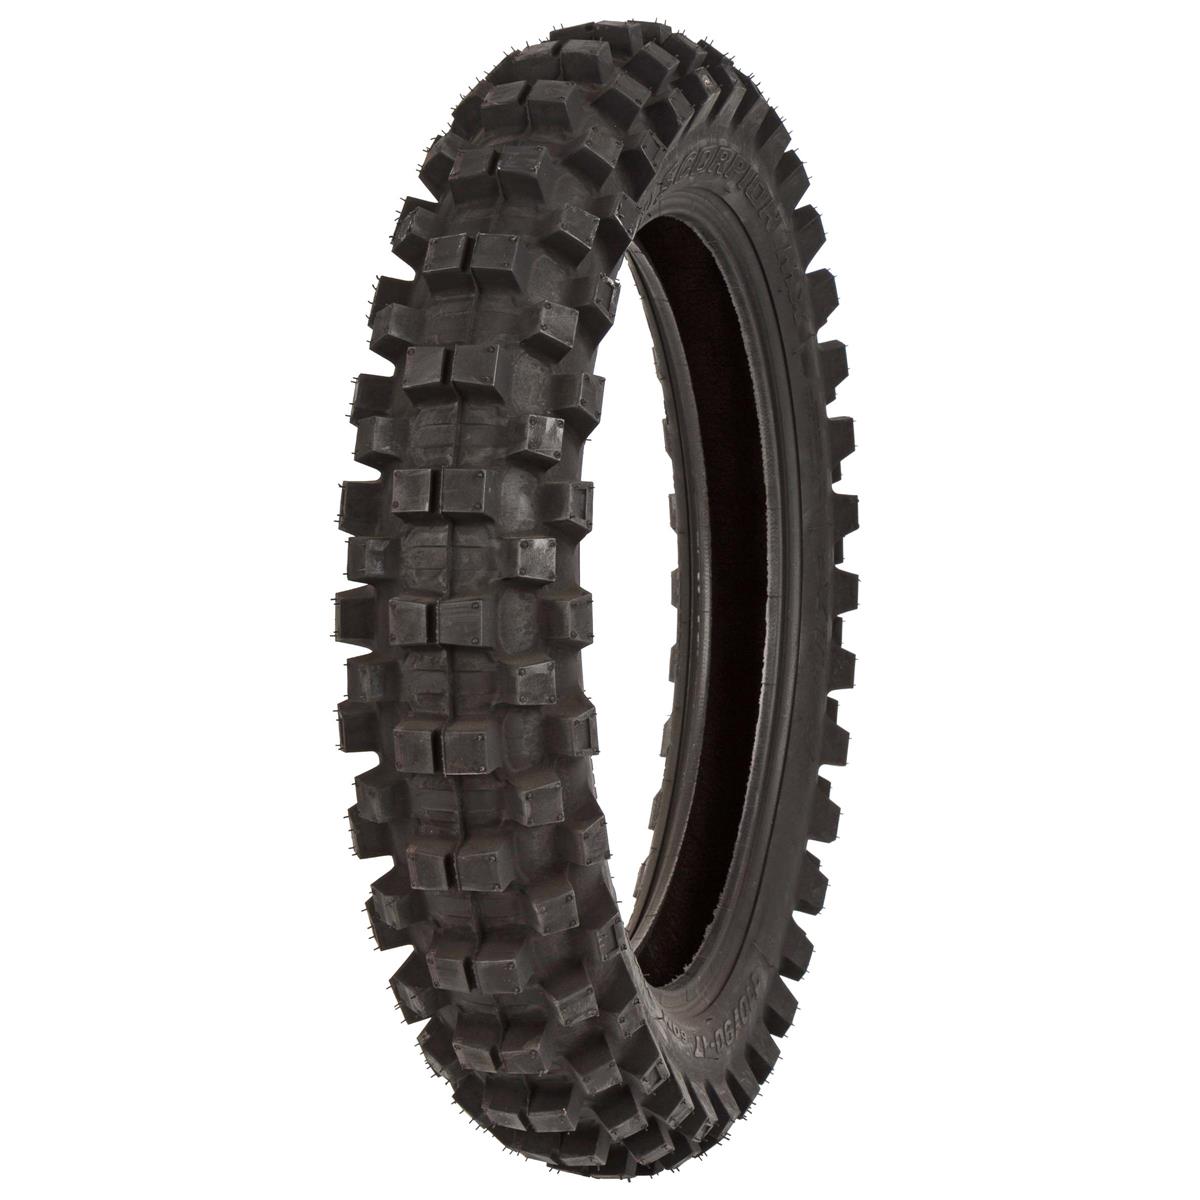 Tyre Overview: Review, Pirelli Scorpion Pro F.I.M. Knobbies - Bike Review